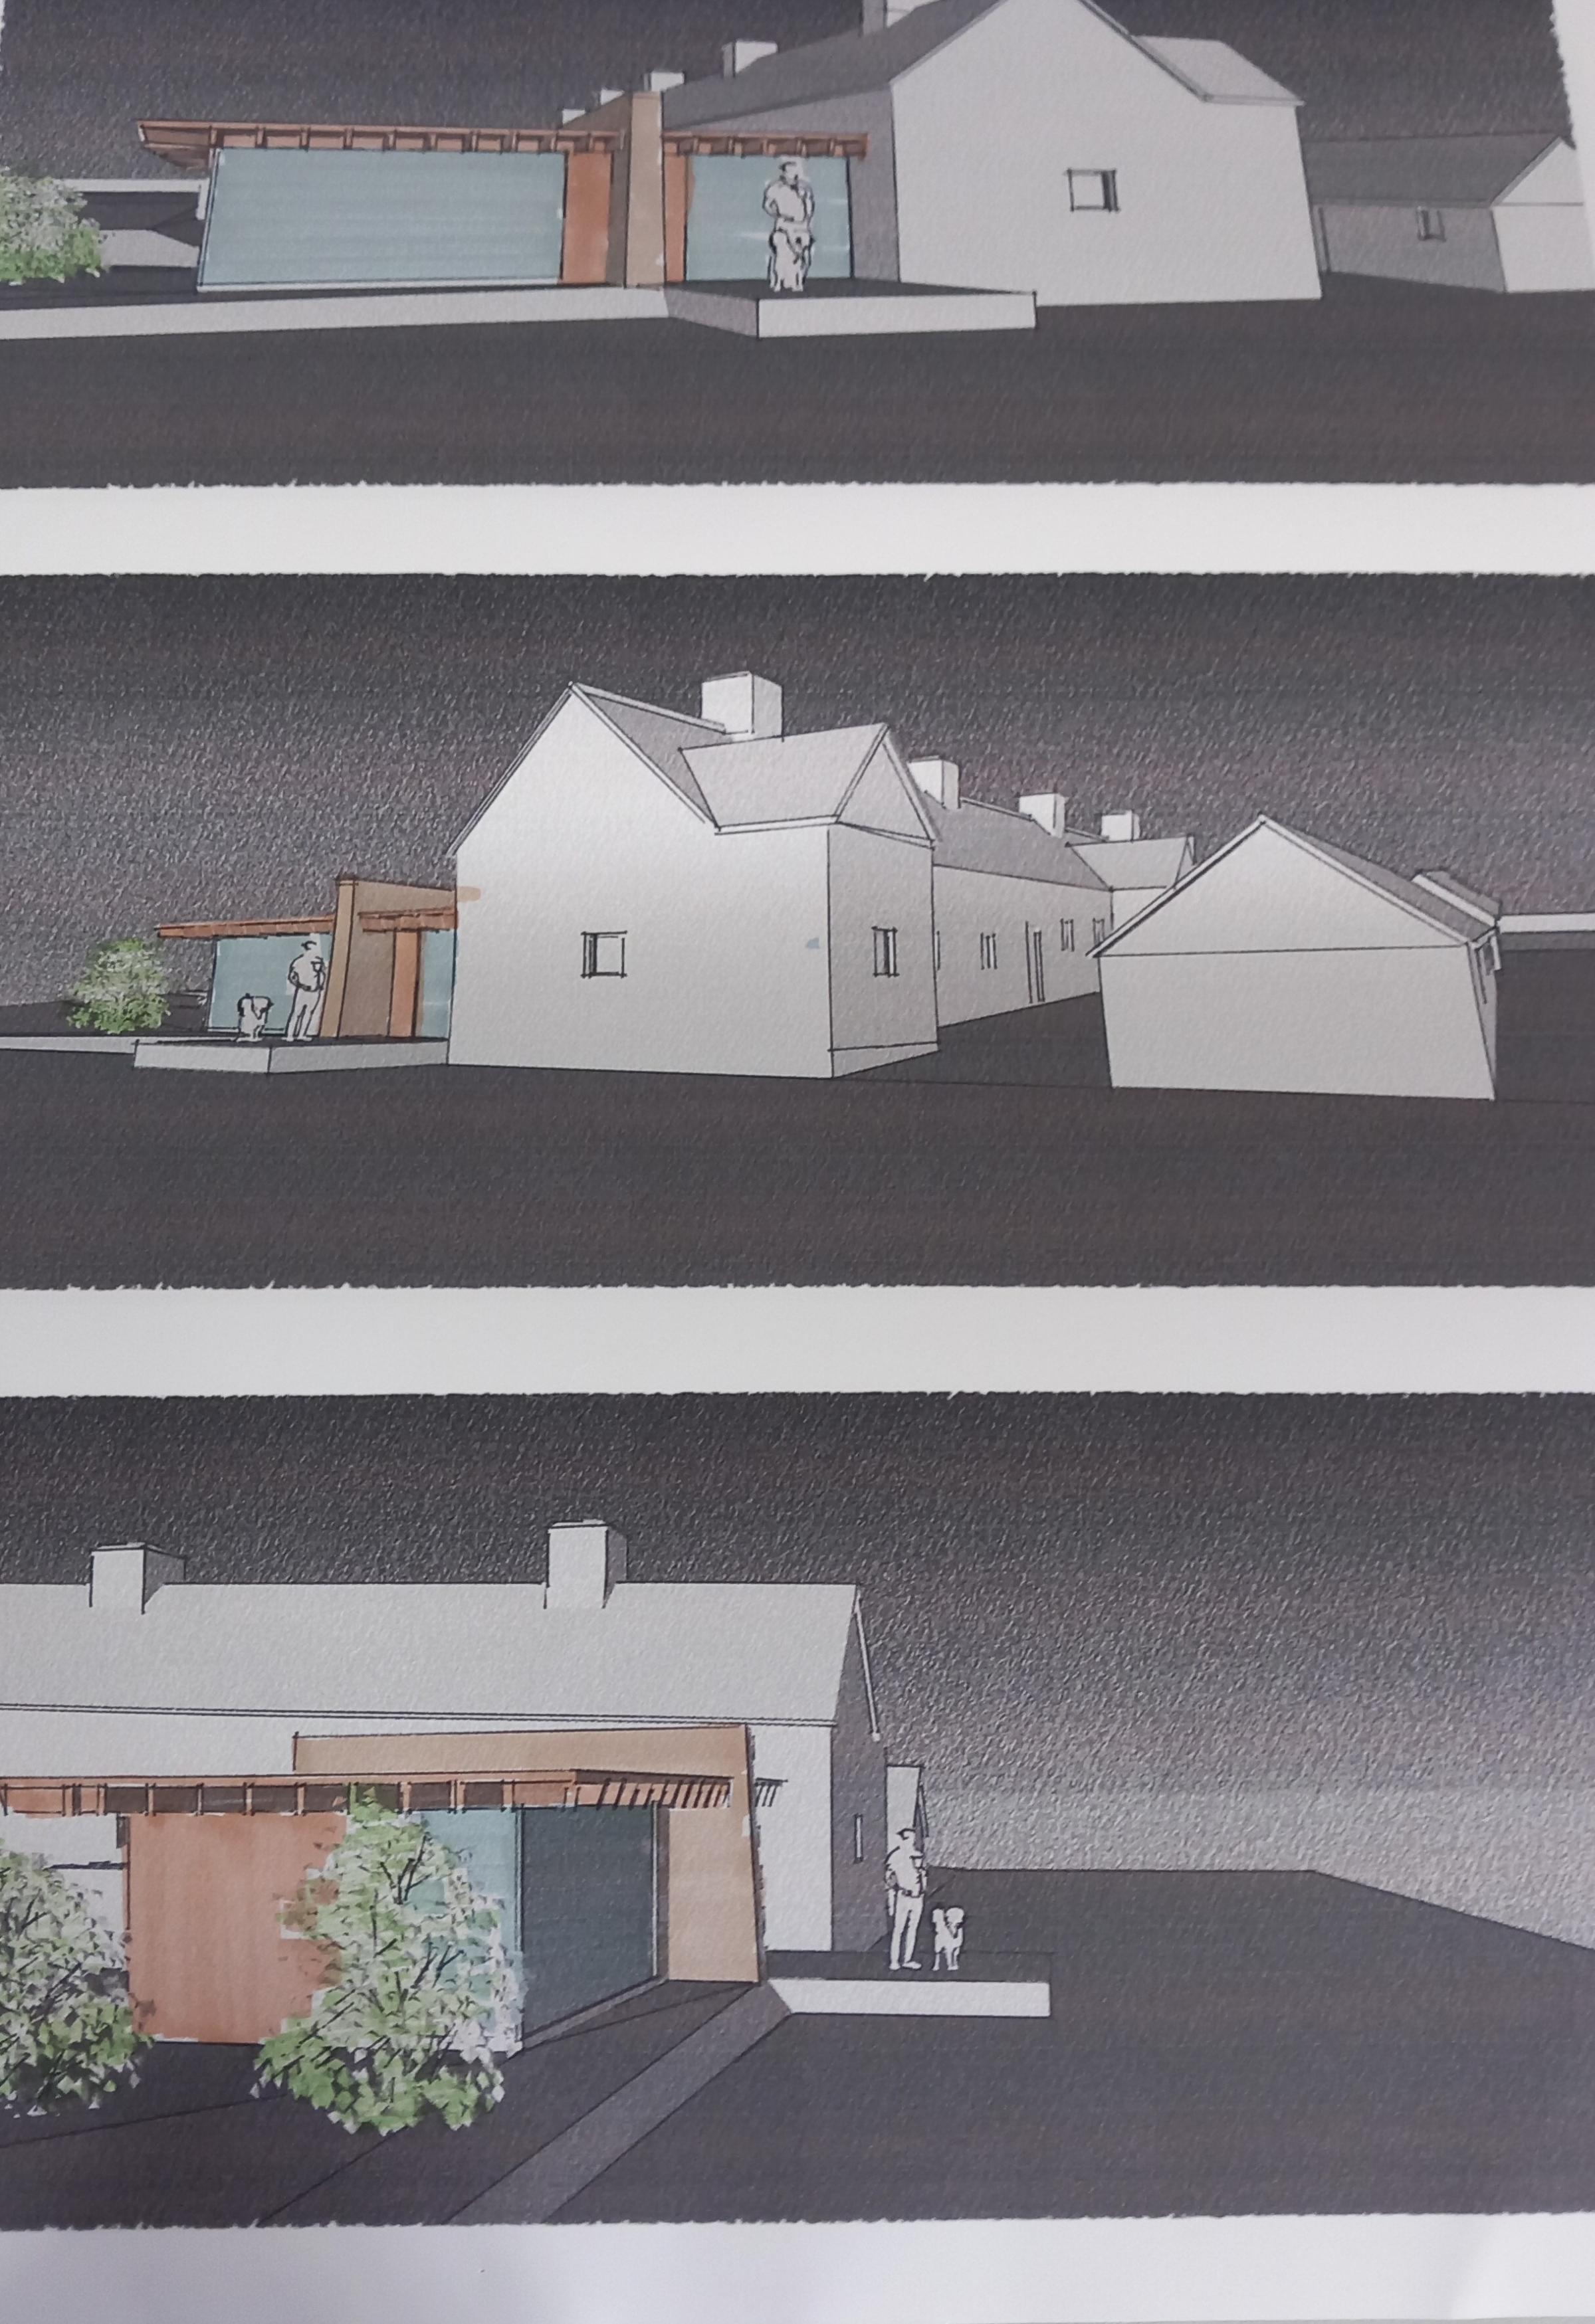 Artist impression of what the Penmynydd Almshouses could look like after restoration 